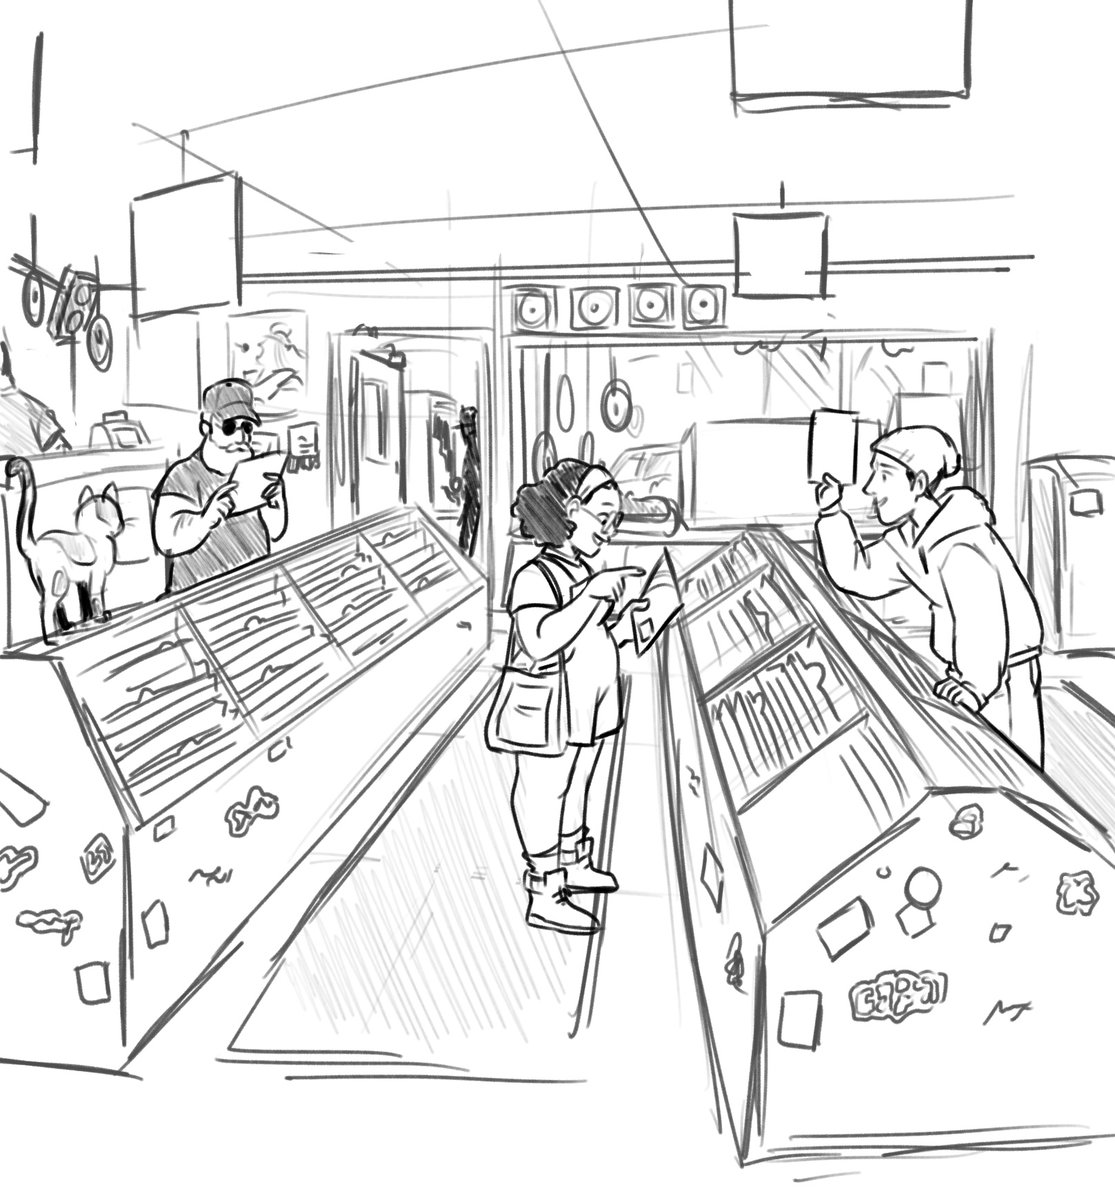 Free-handing a record store background for fun for some reason 